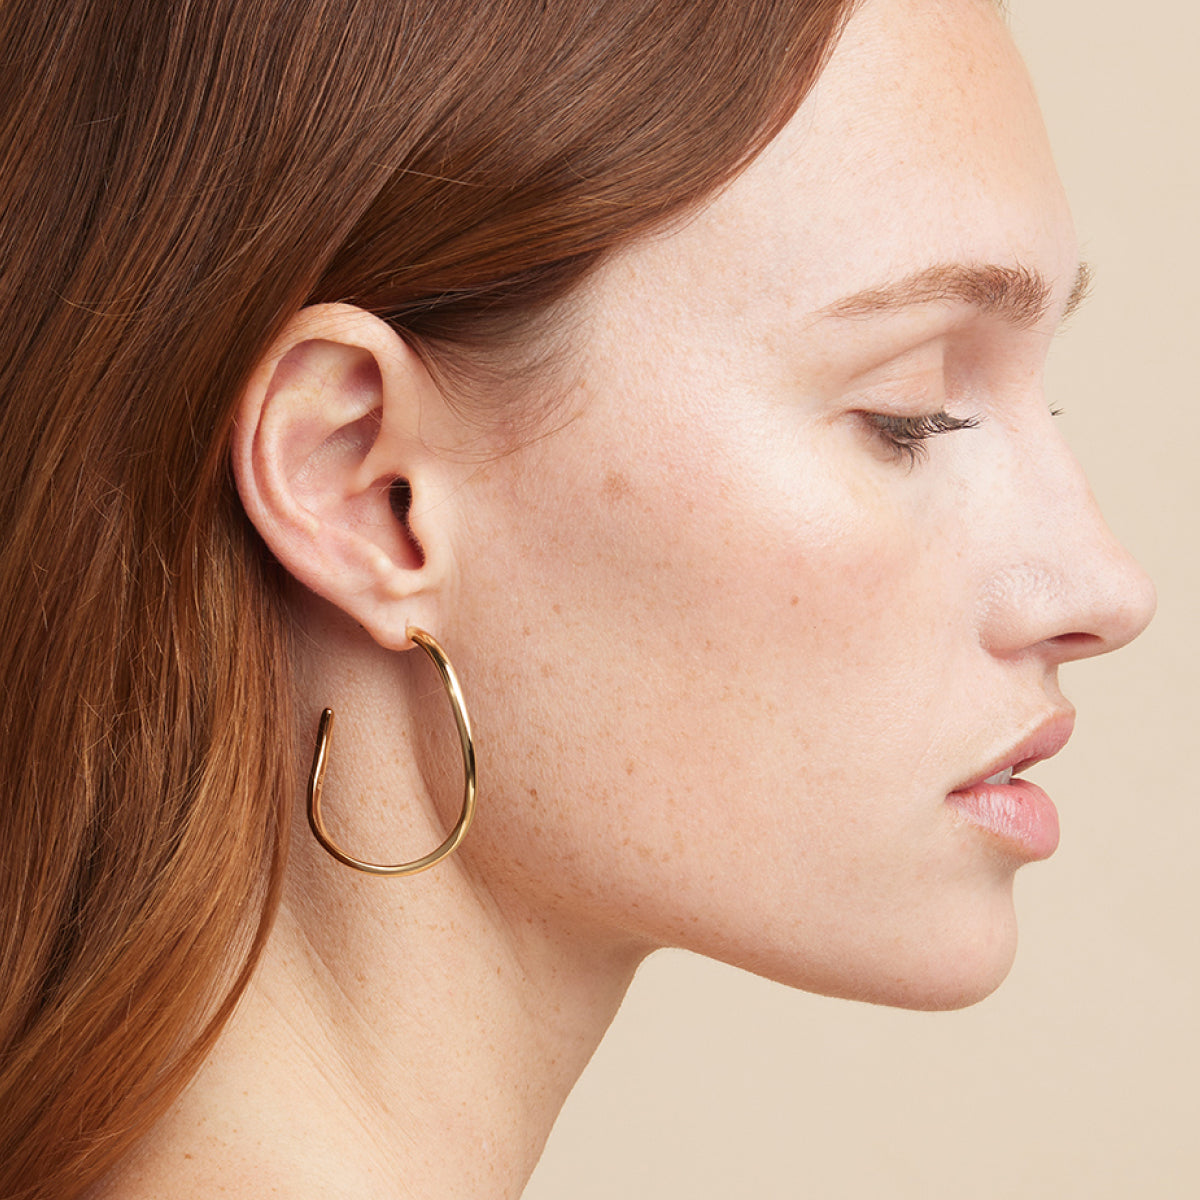 One Ear Piercing Appointment – Porter Lyons